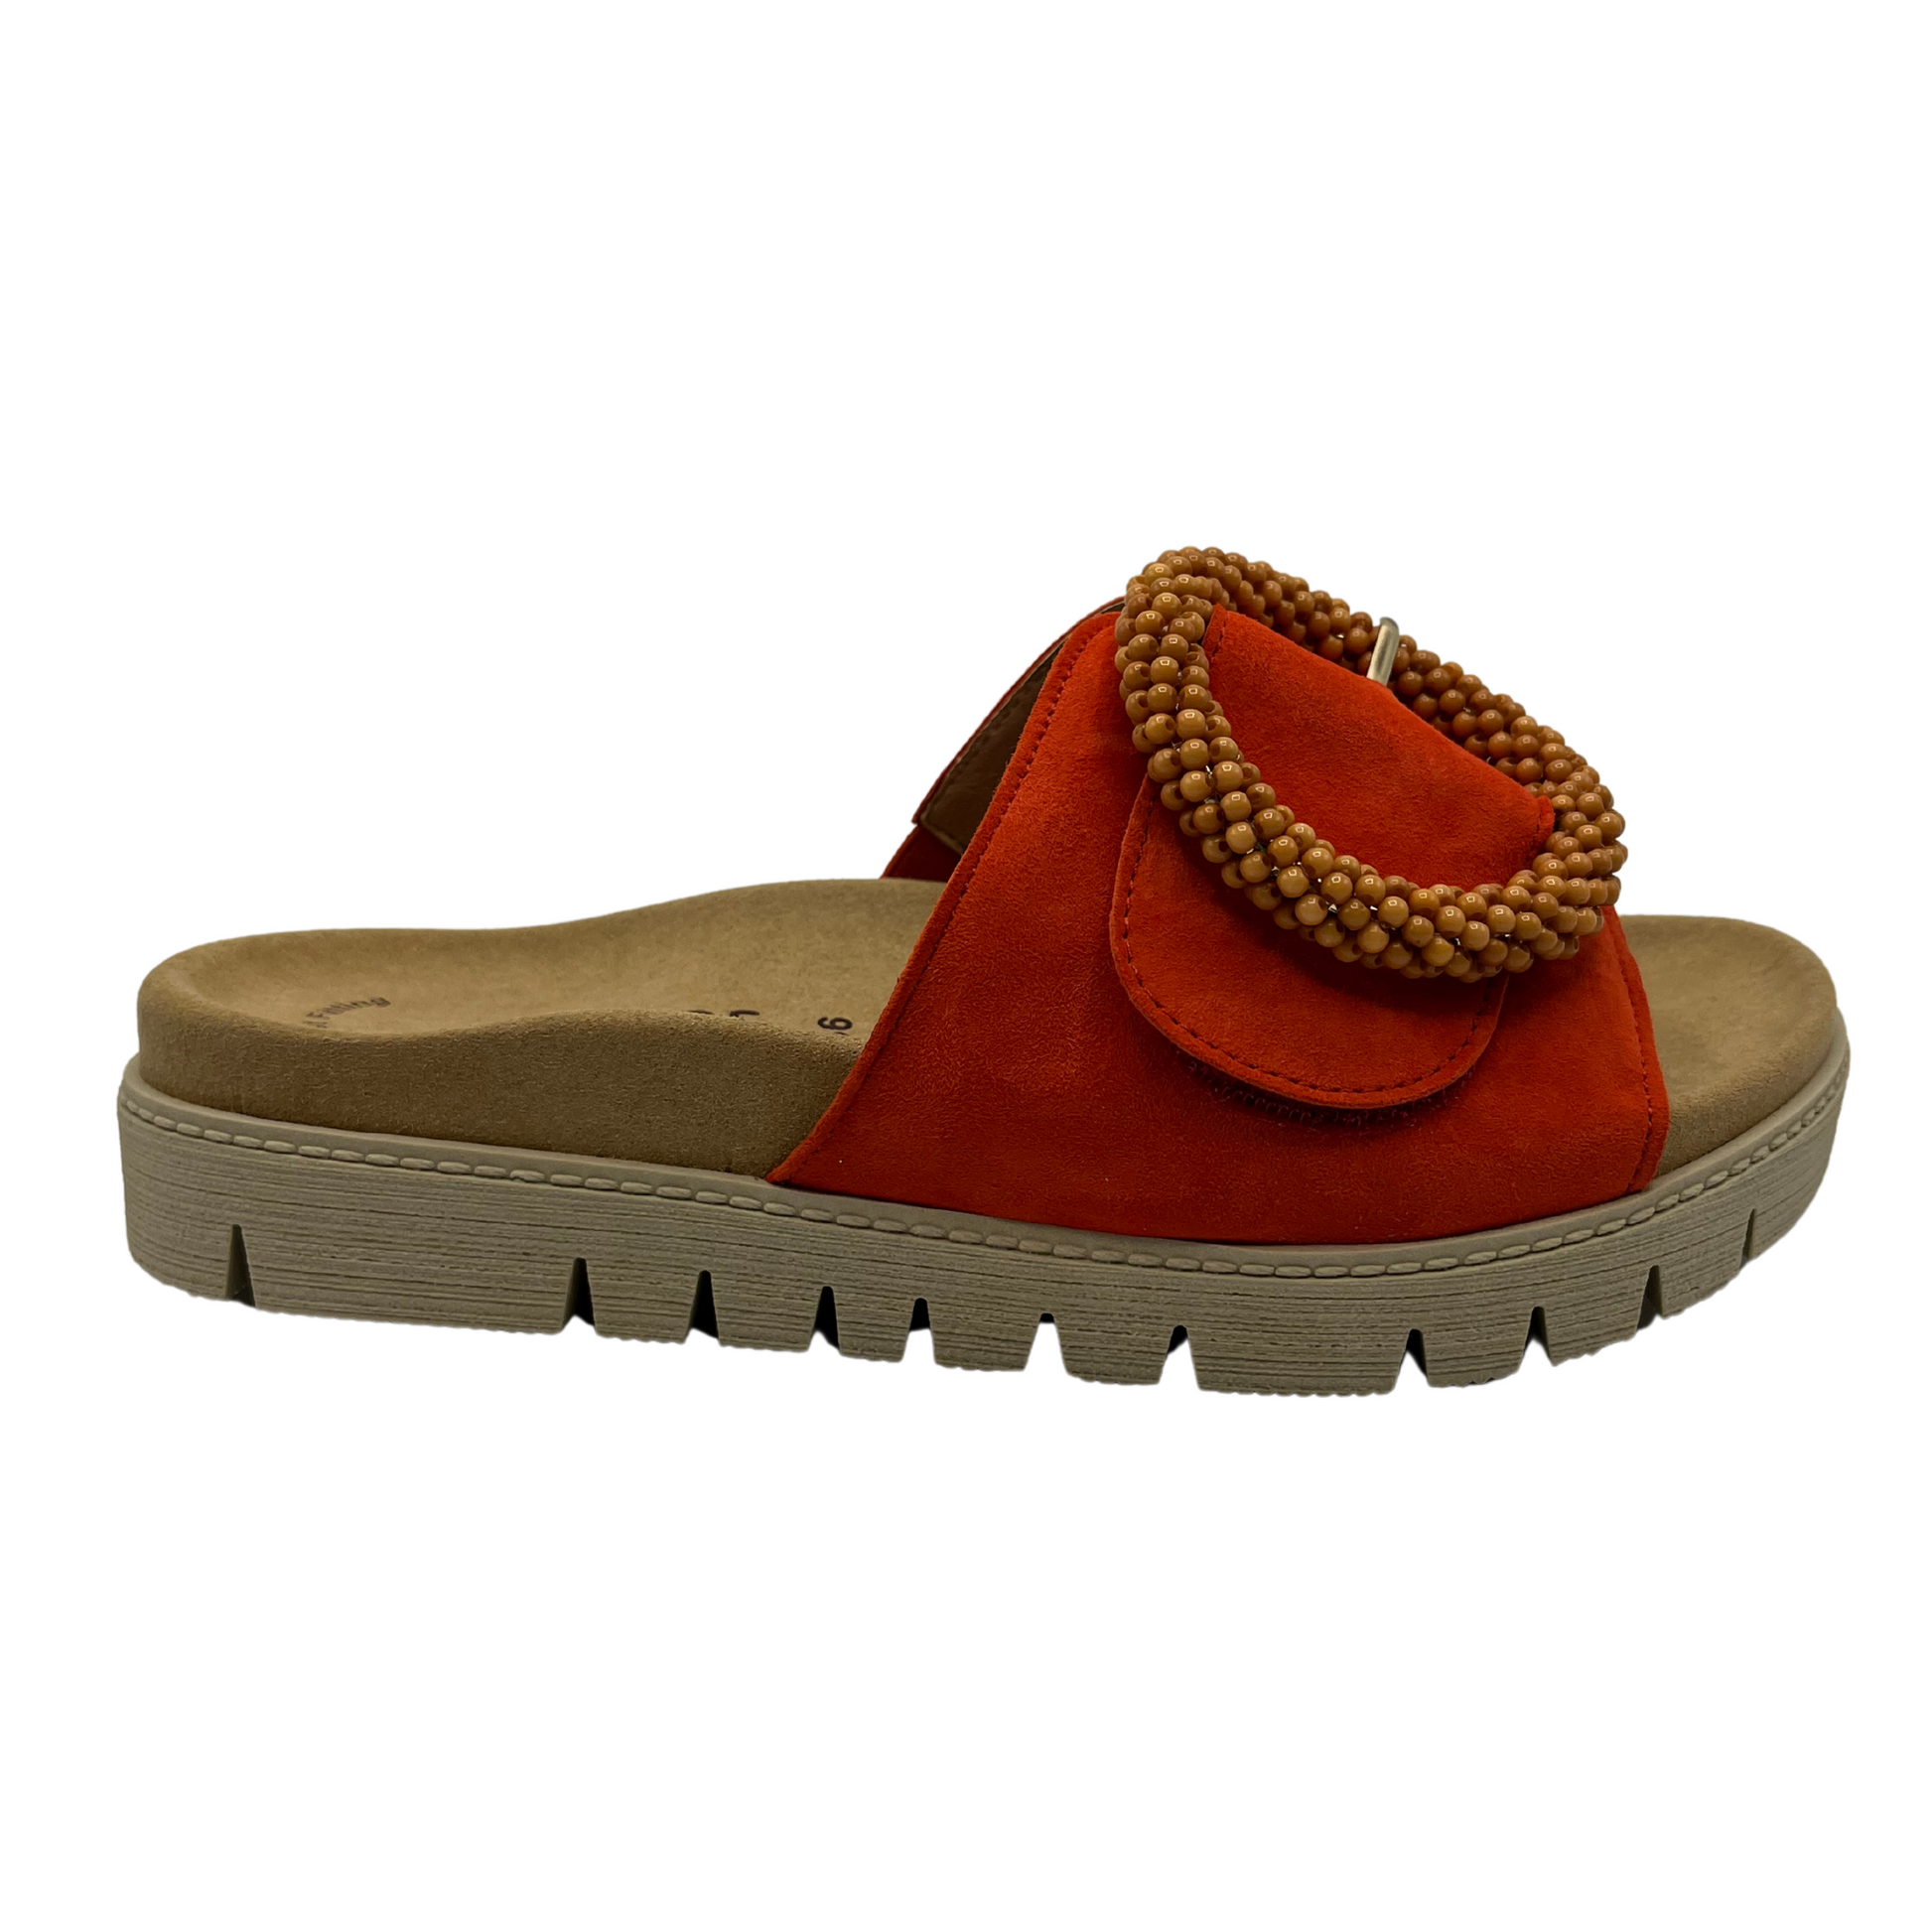 Right facing view of orange suede slide with large buckle detail and anatomical footbed